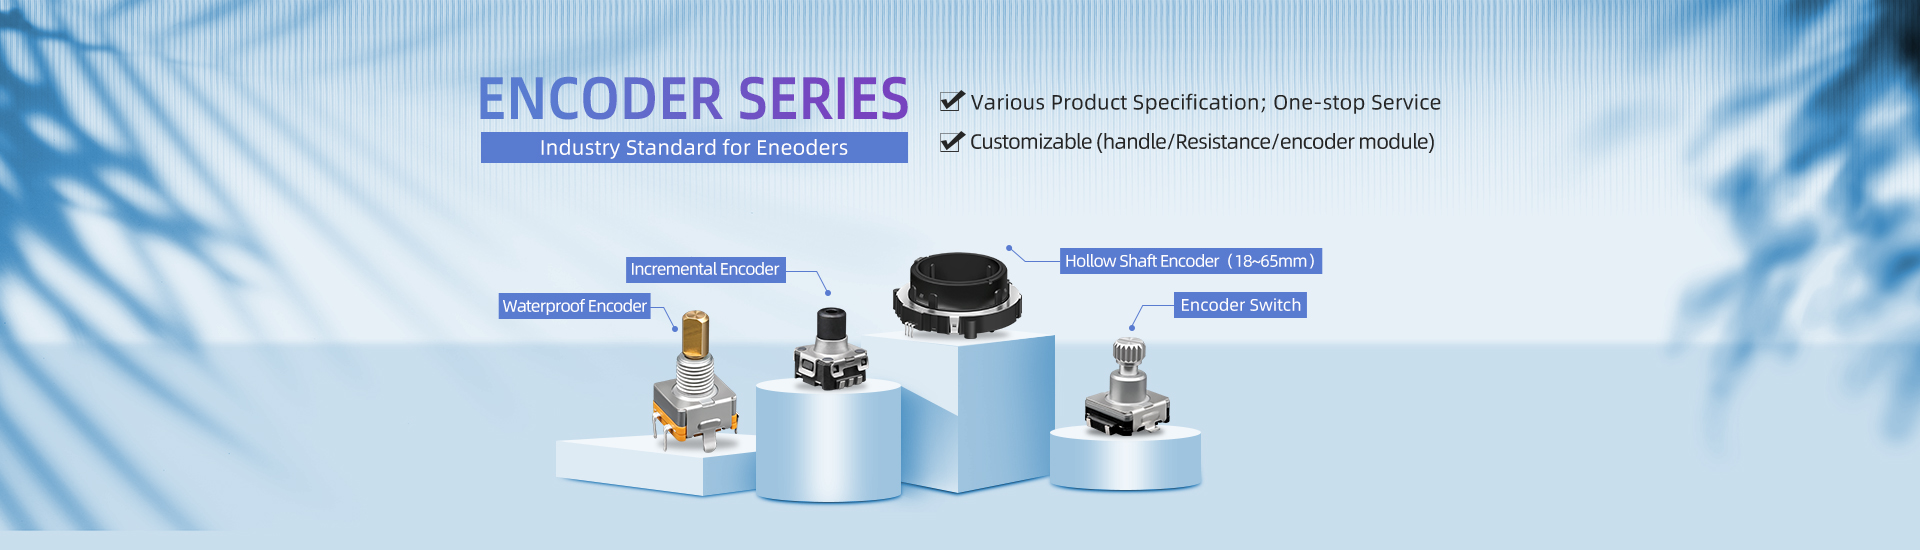 Selection Table Of Encoders